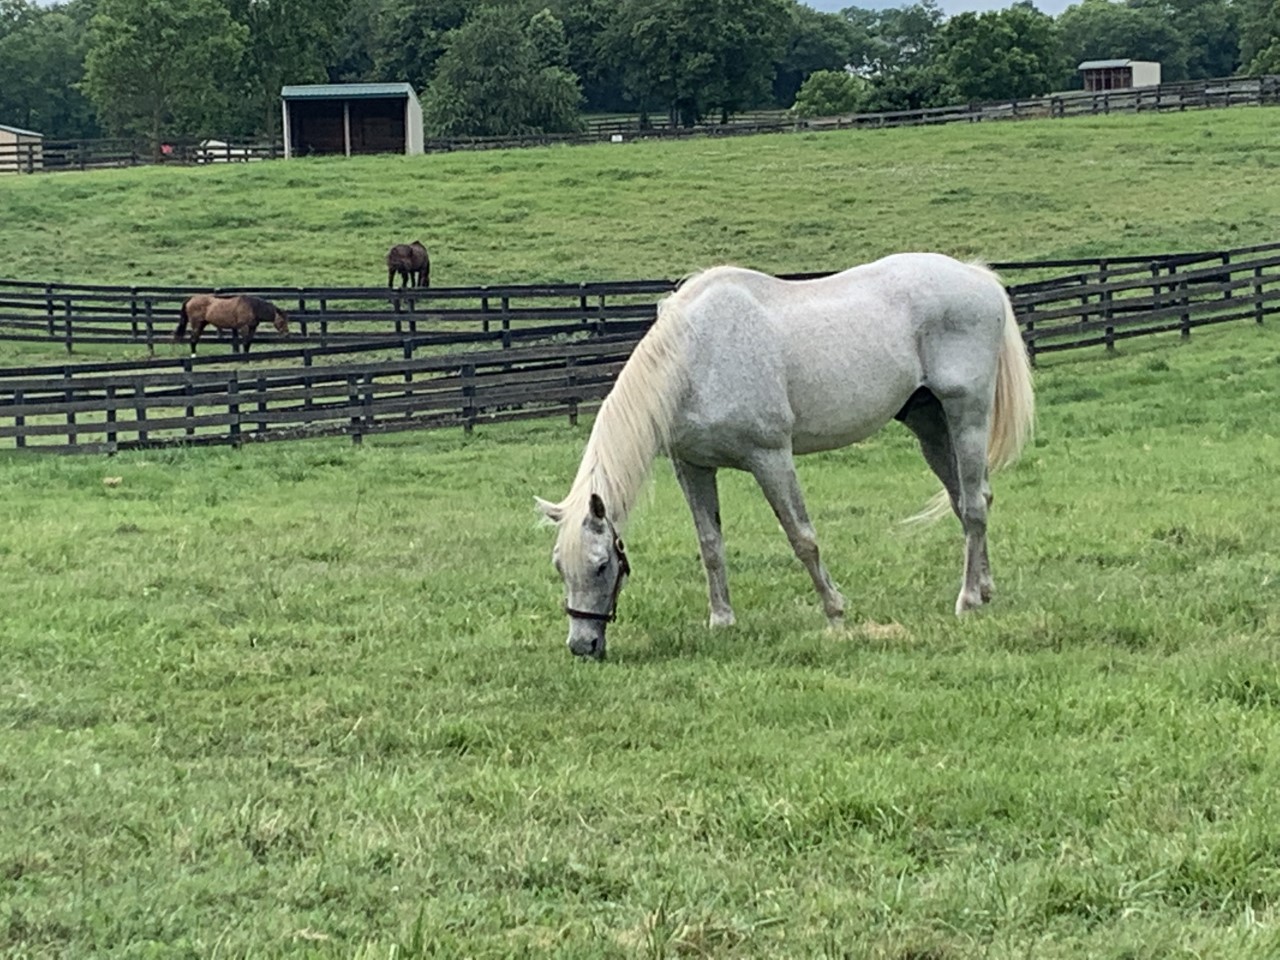 Kentucky Derby, Preakness and Dubai World Cup winner Silver Charm at home at Old Friends. Photo: Patrick Lawrence Gilligan